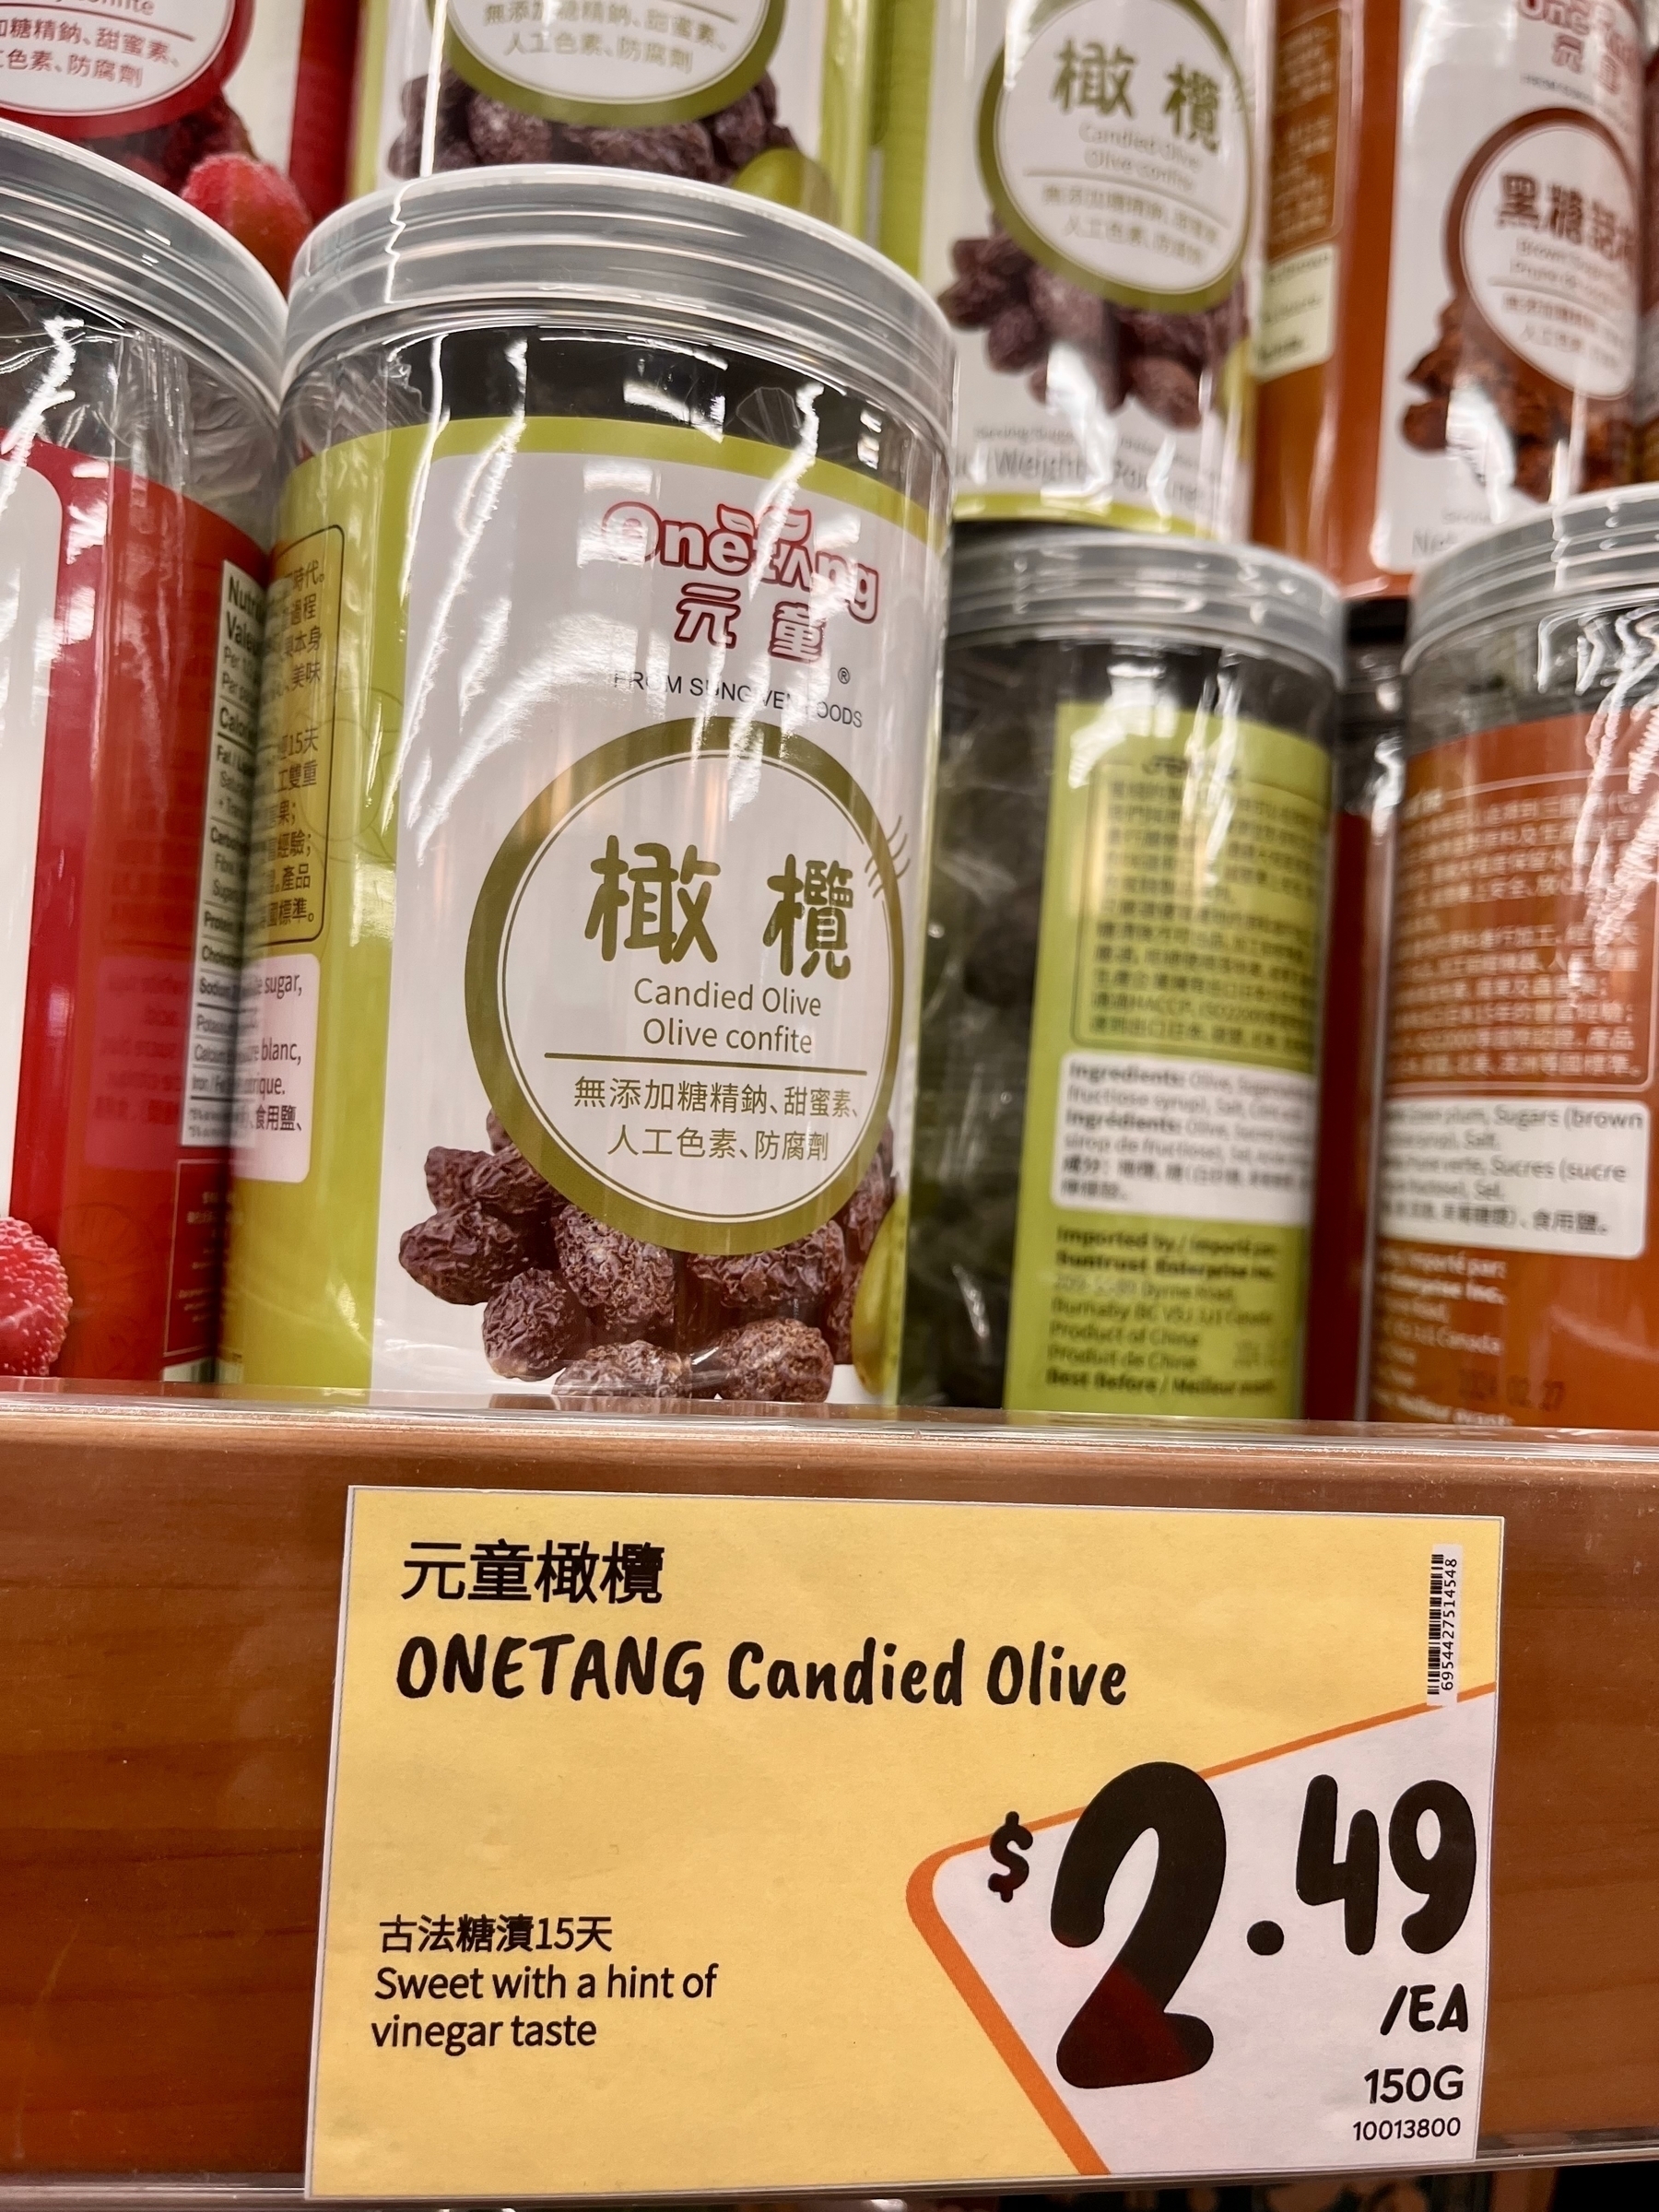 ONETANG Candied Olive